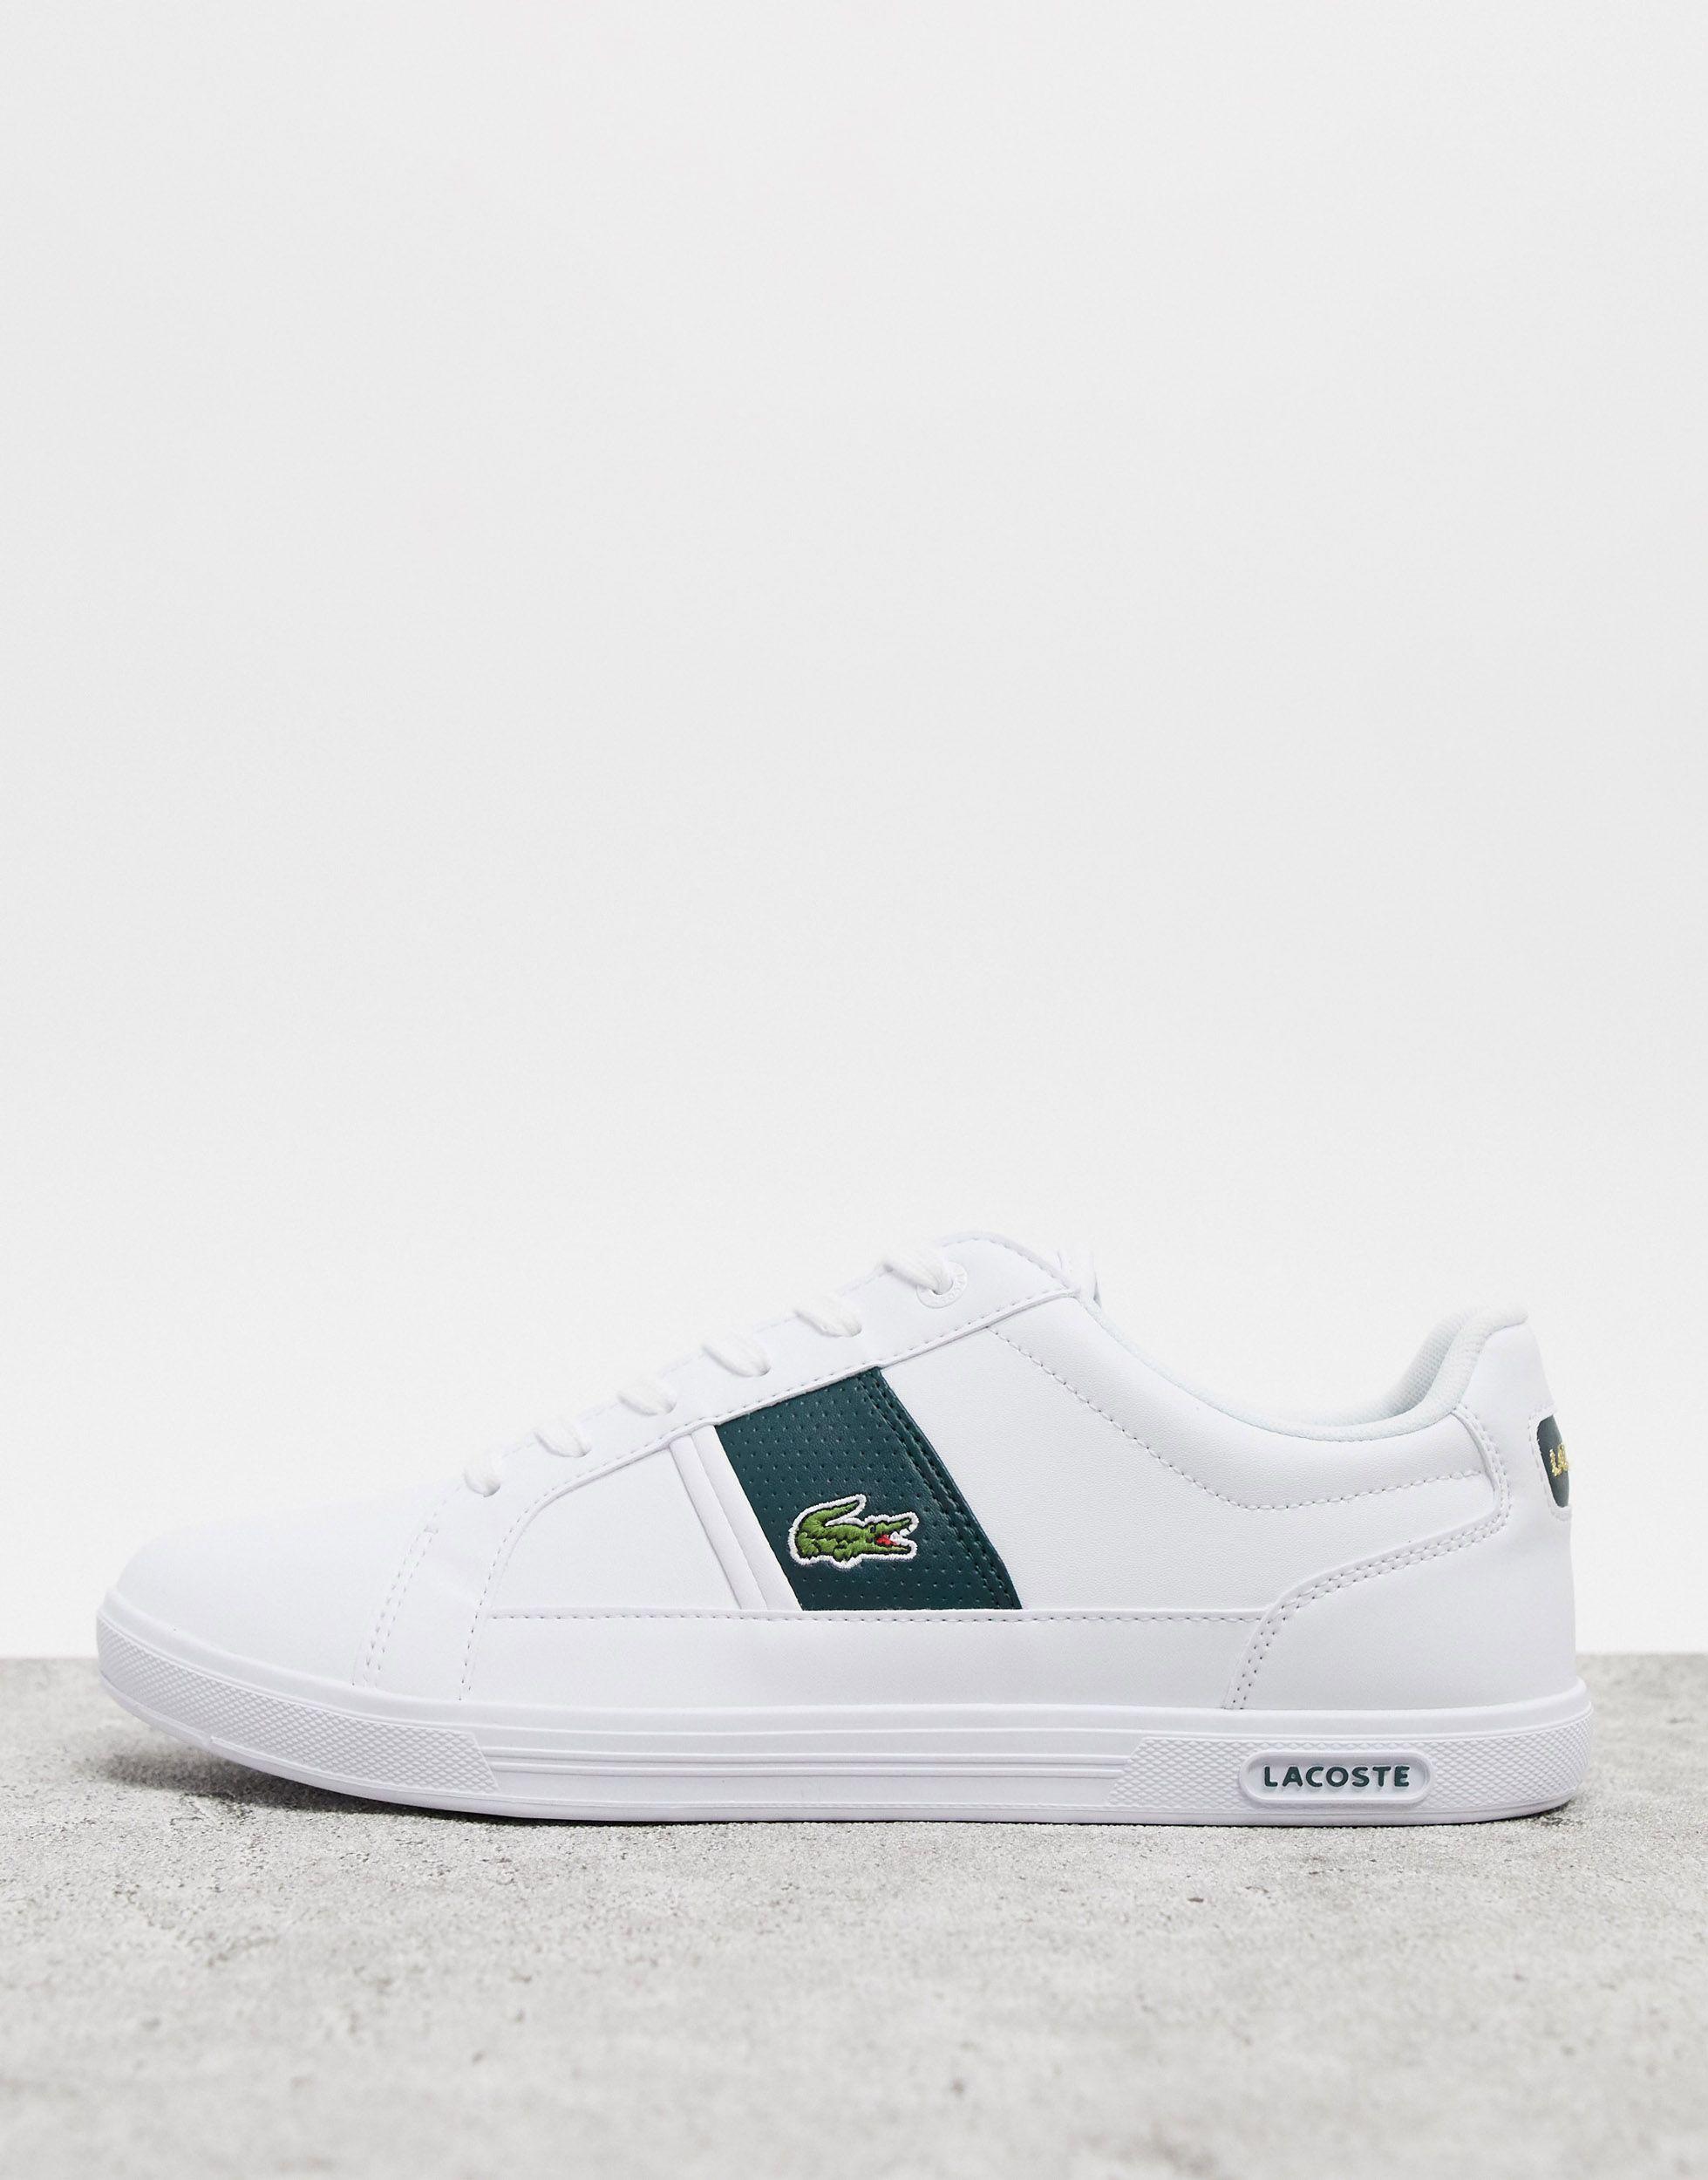 Lacoste Europa Sneakers With Green Stripe Dubai, SAVE 46% - aveclumiere.com